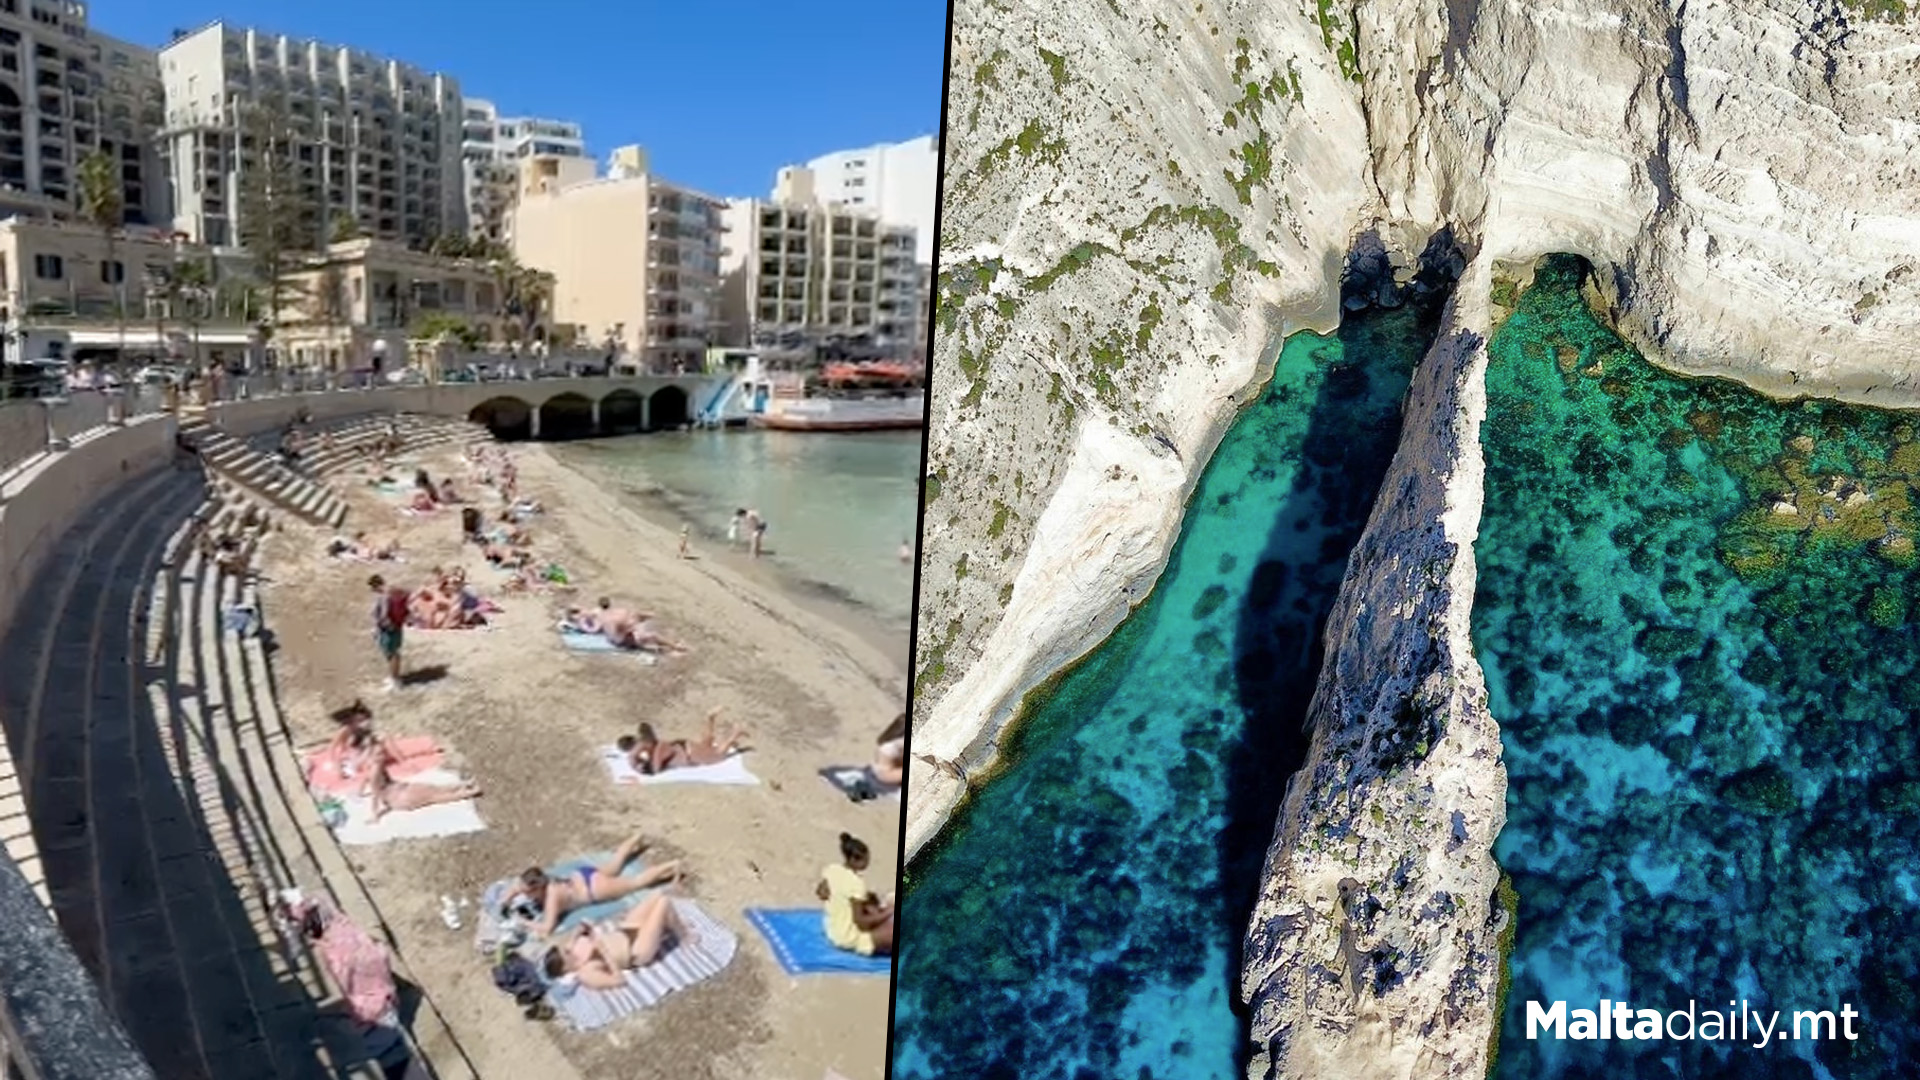 People Flock To Beaches As Temperatures Soar In Malta